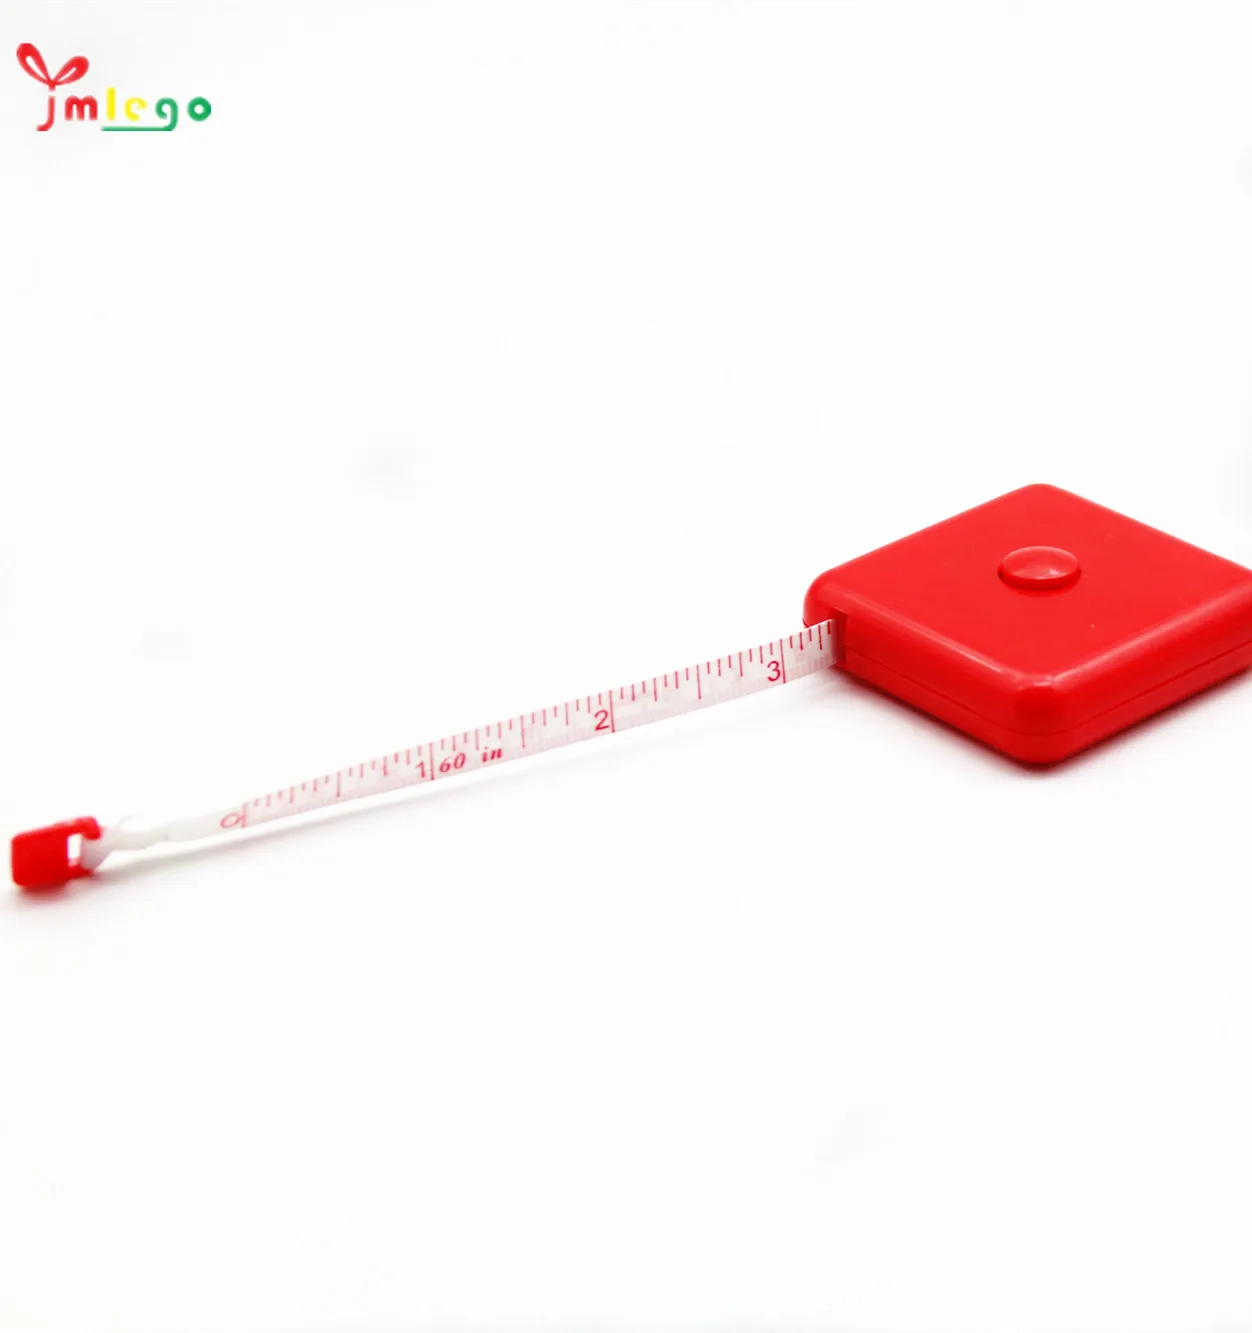 Retractable Body Measuring Ruler Sewing Cloth Tailor Tape Measure Soft 60" 1.5M 